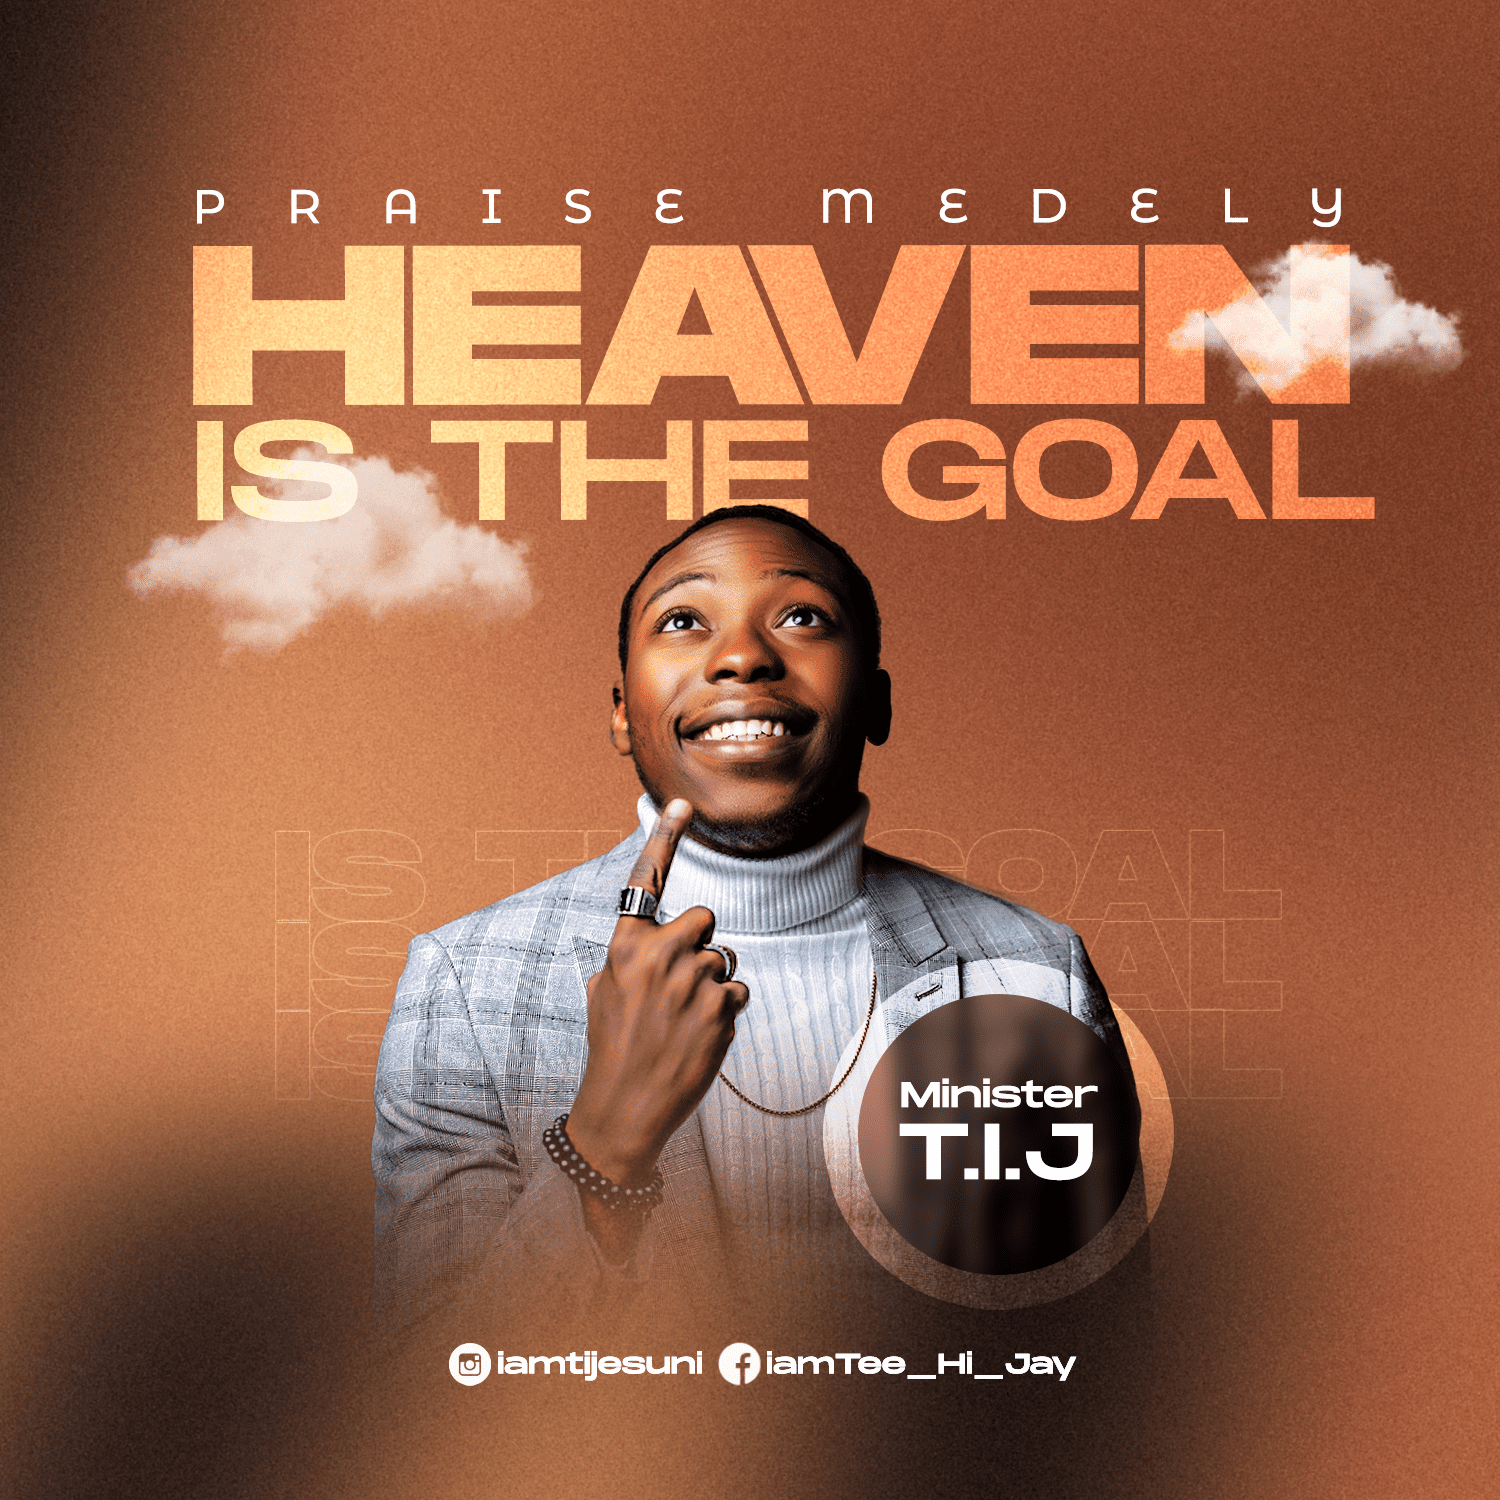 Download Mp3: Minister T.I.J - Heaven is the Goal (Praise Medley)